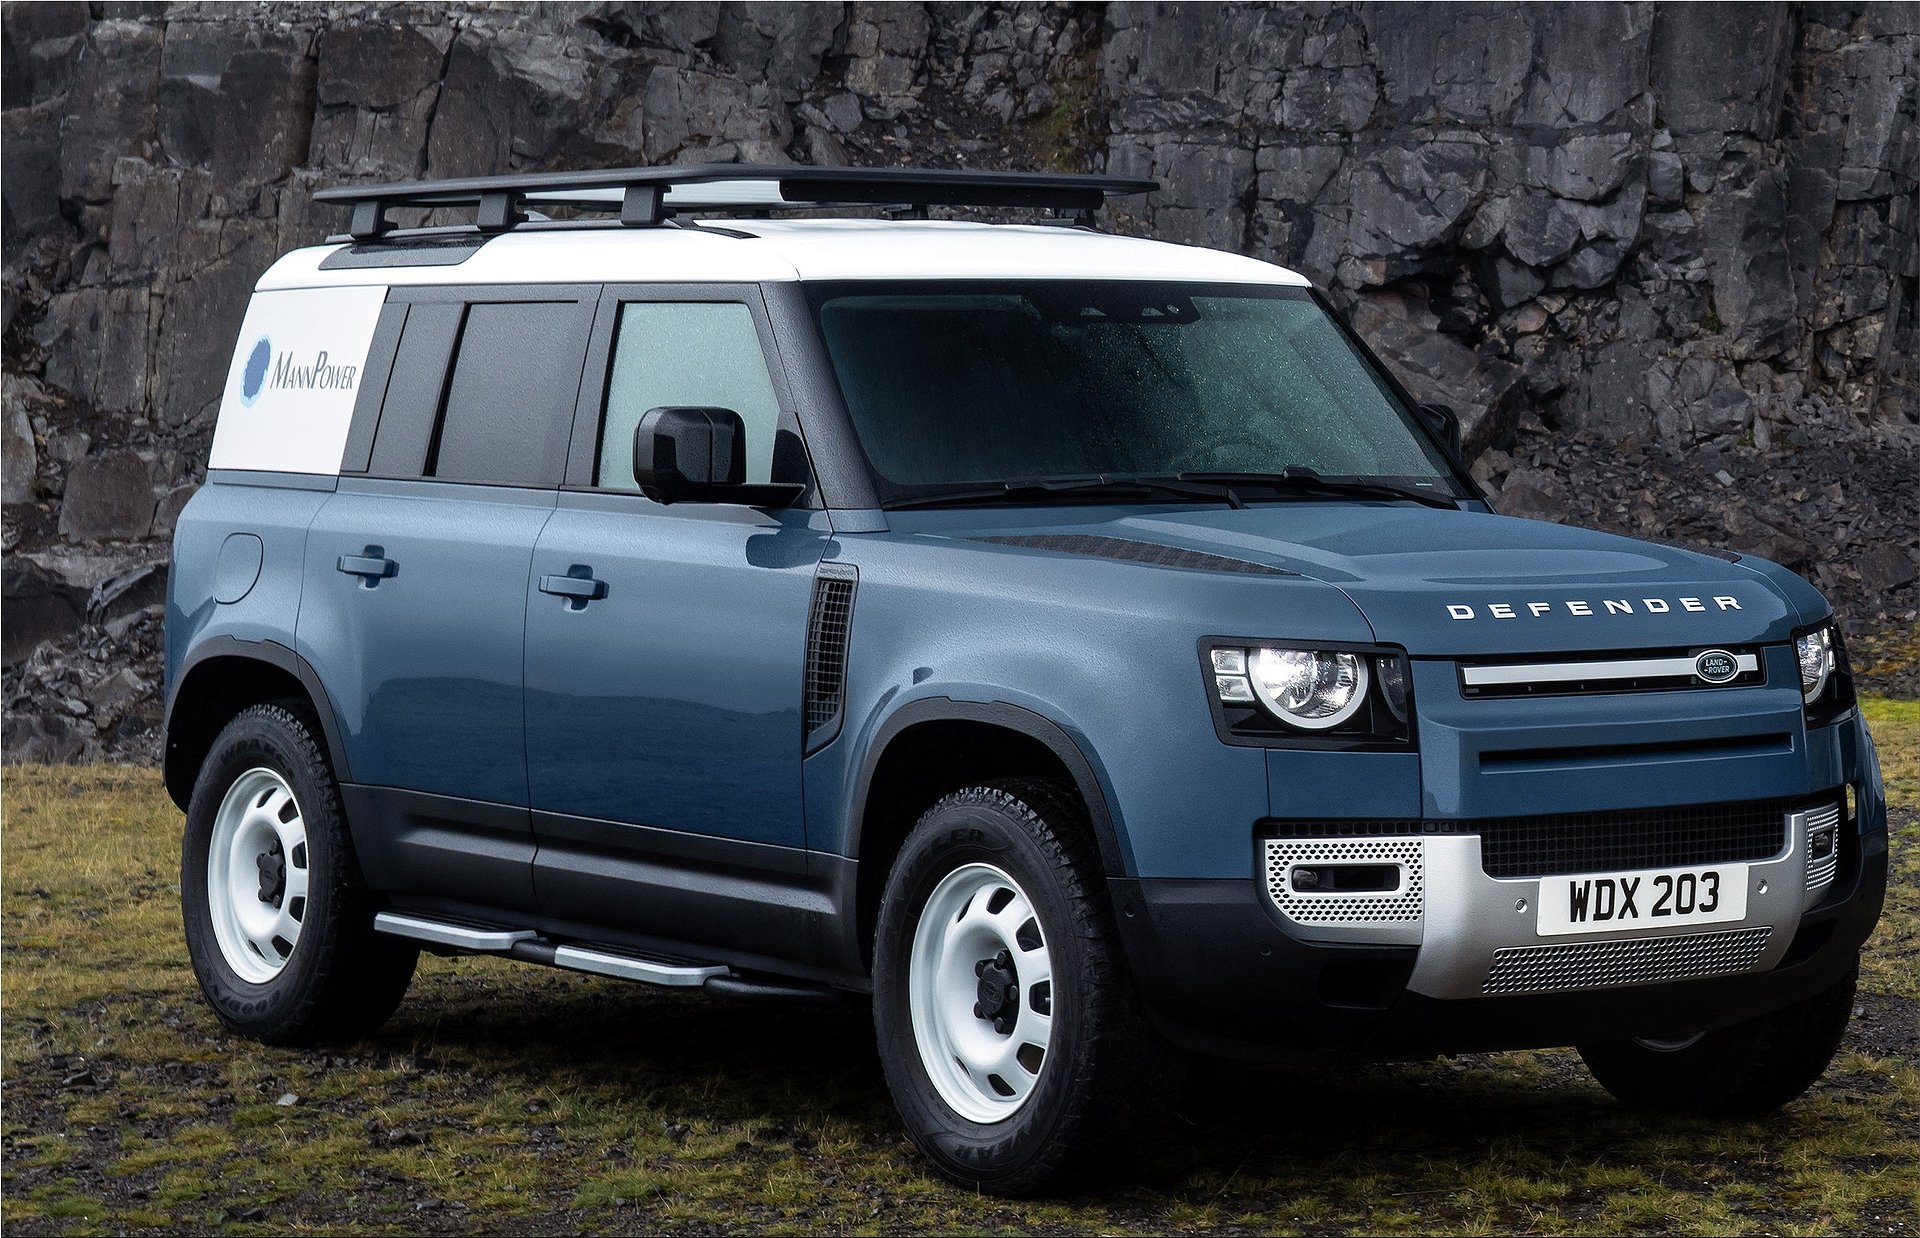 The new Land Rover Defender P400e plug-in hybrid with 404 hp | Electric